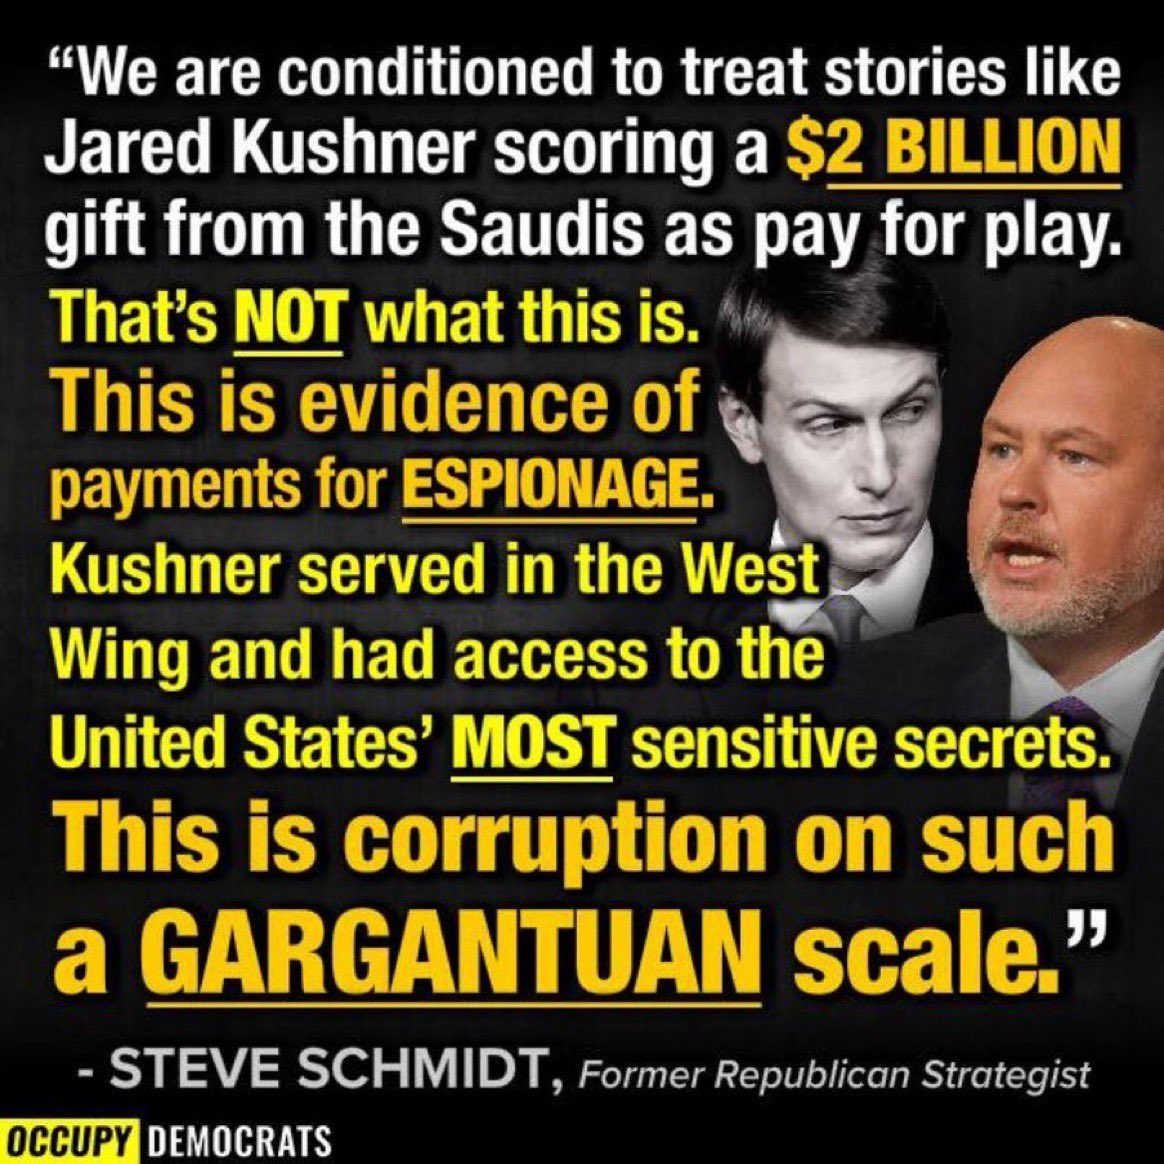 Raskin has right, MAGA Republicans would rather run around and chase baseless conspiracy theories about the Bidens than investigate how Jared Kushner got $2 billion from the Saudis.

By the way Trump was taking money from foreign governments through his businesses while he was…